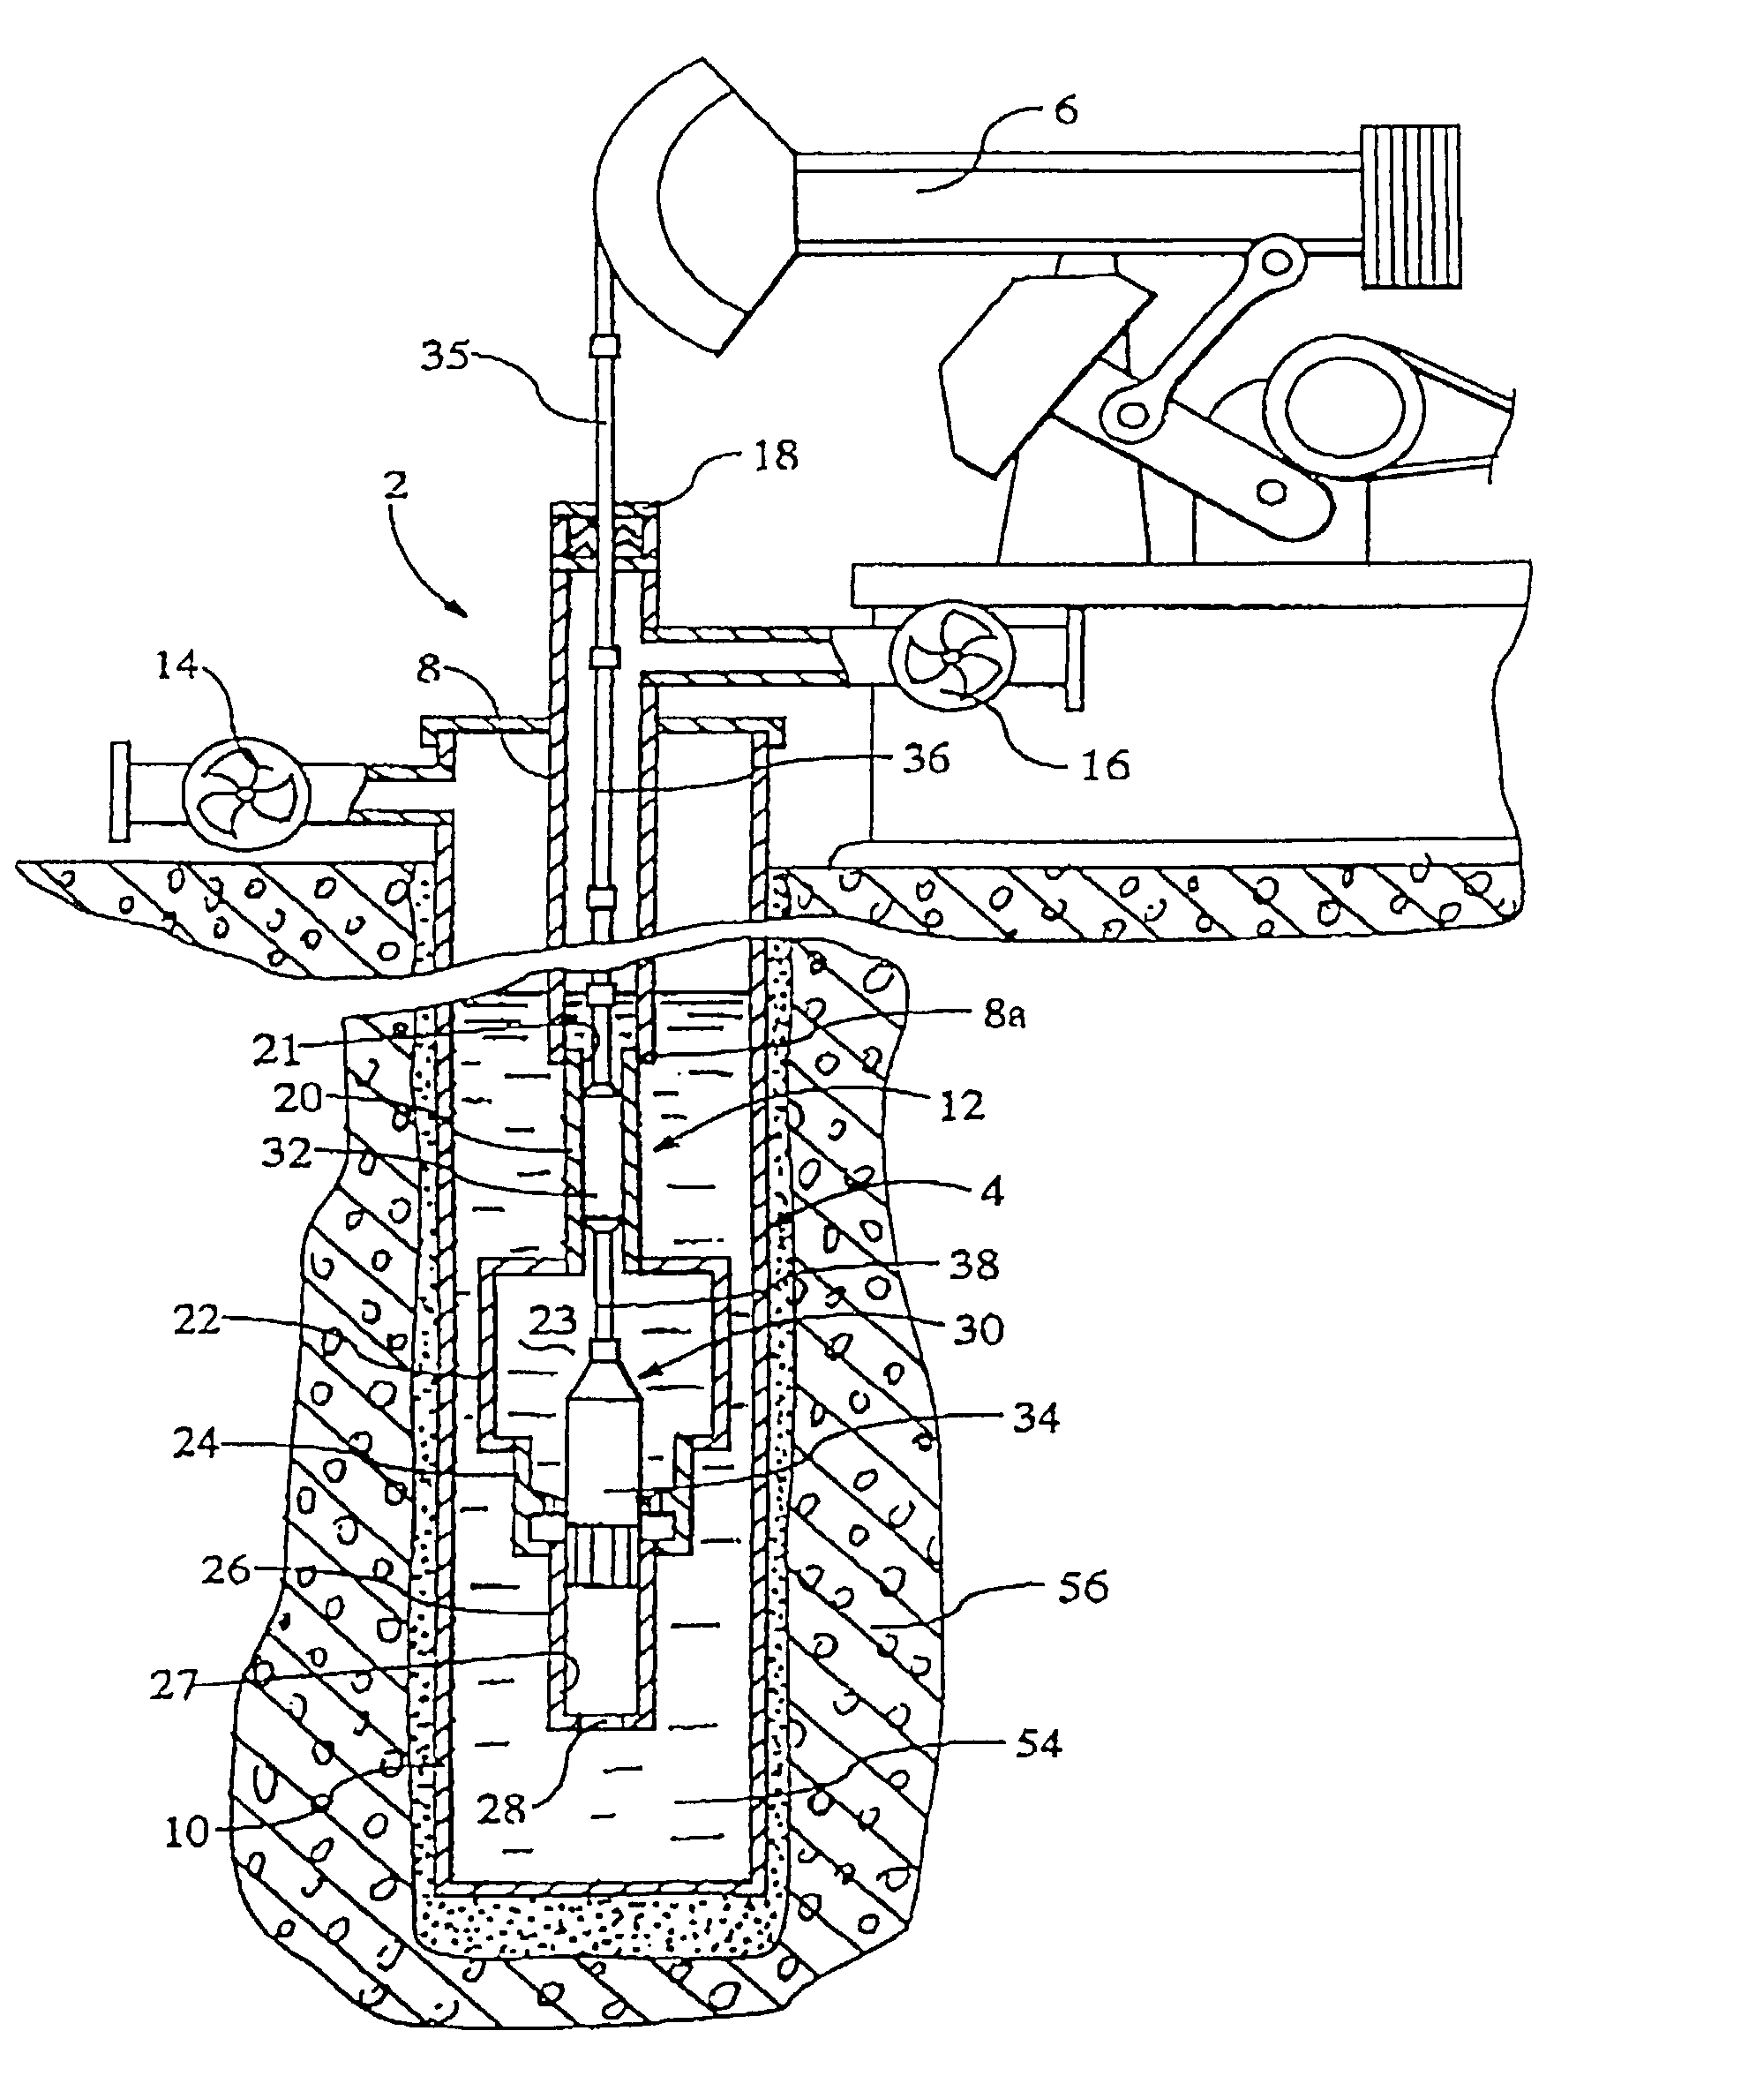 Method and apparatus for seismic stimulation of fluid-bearing formations